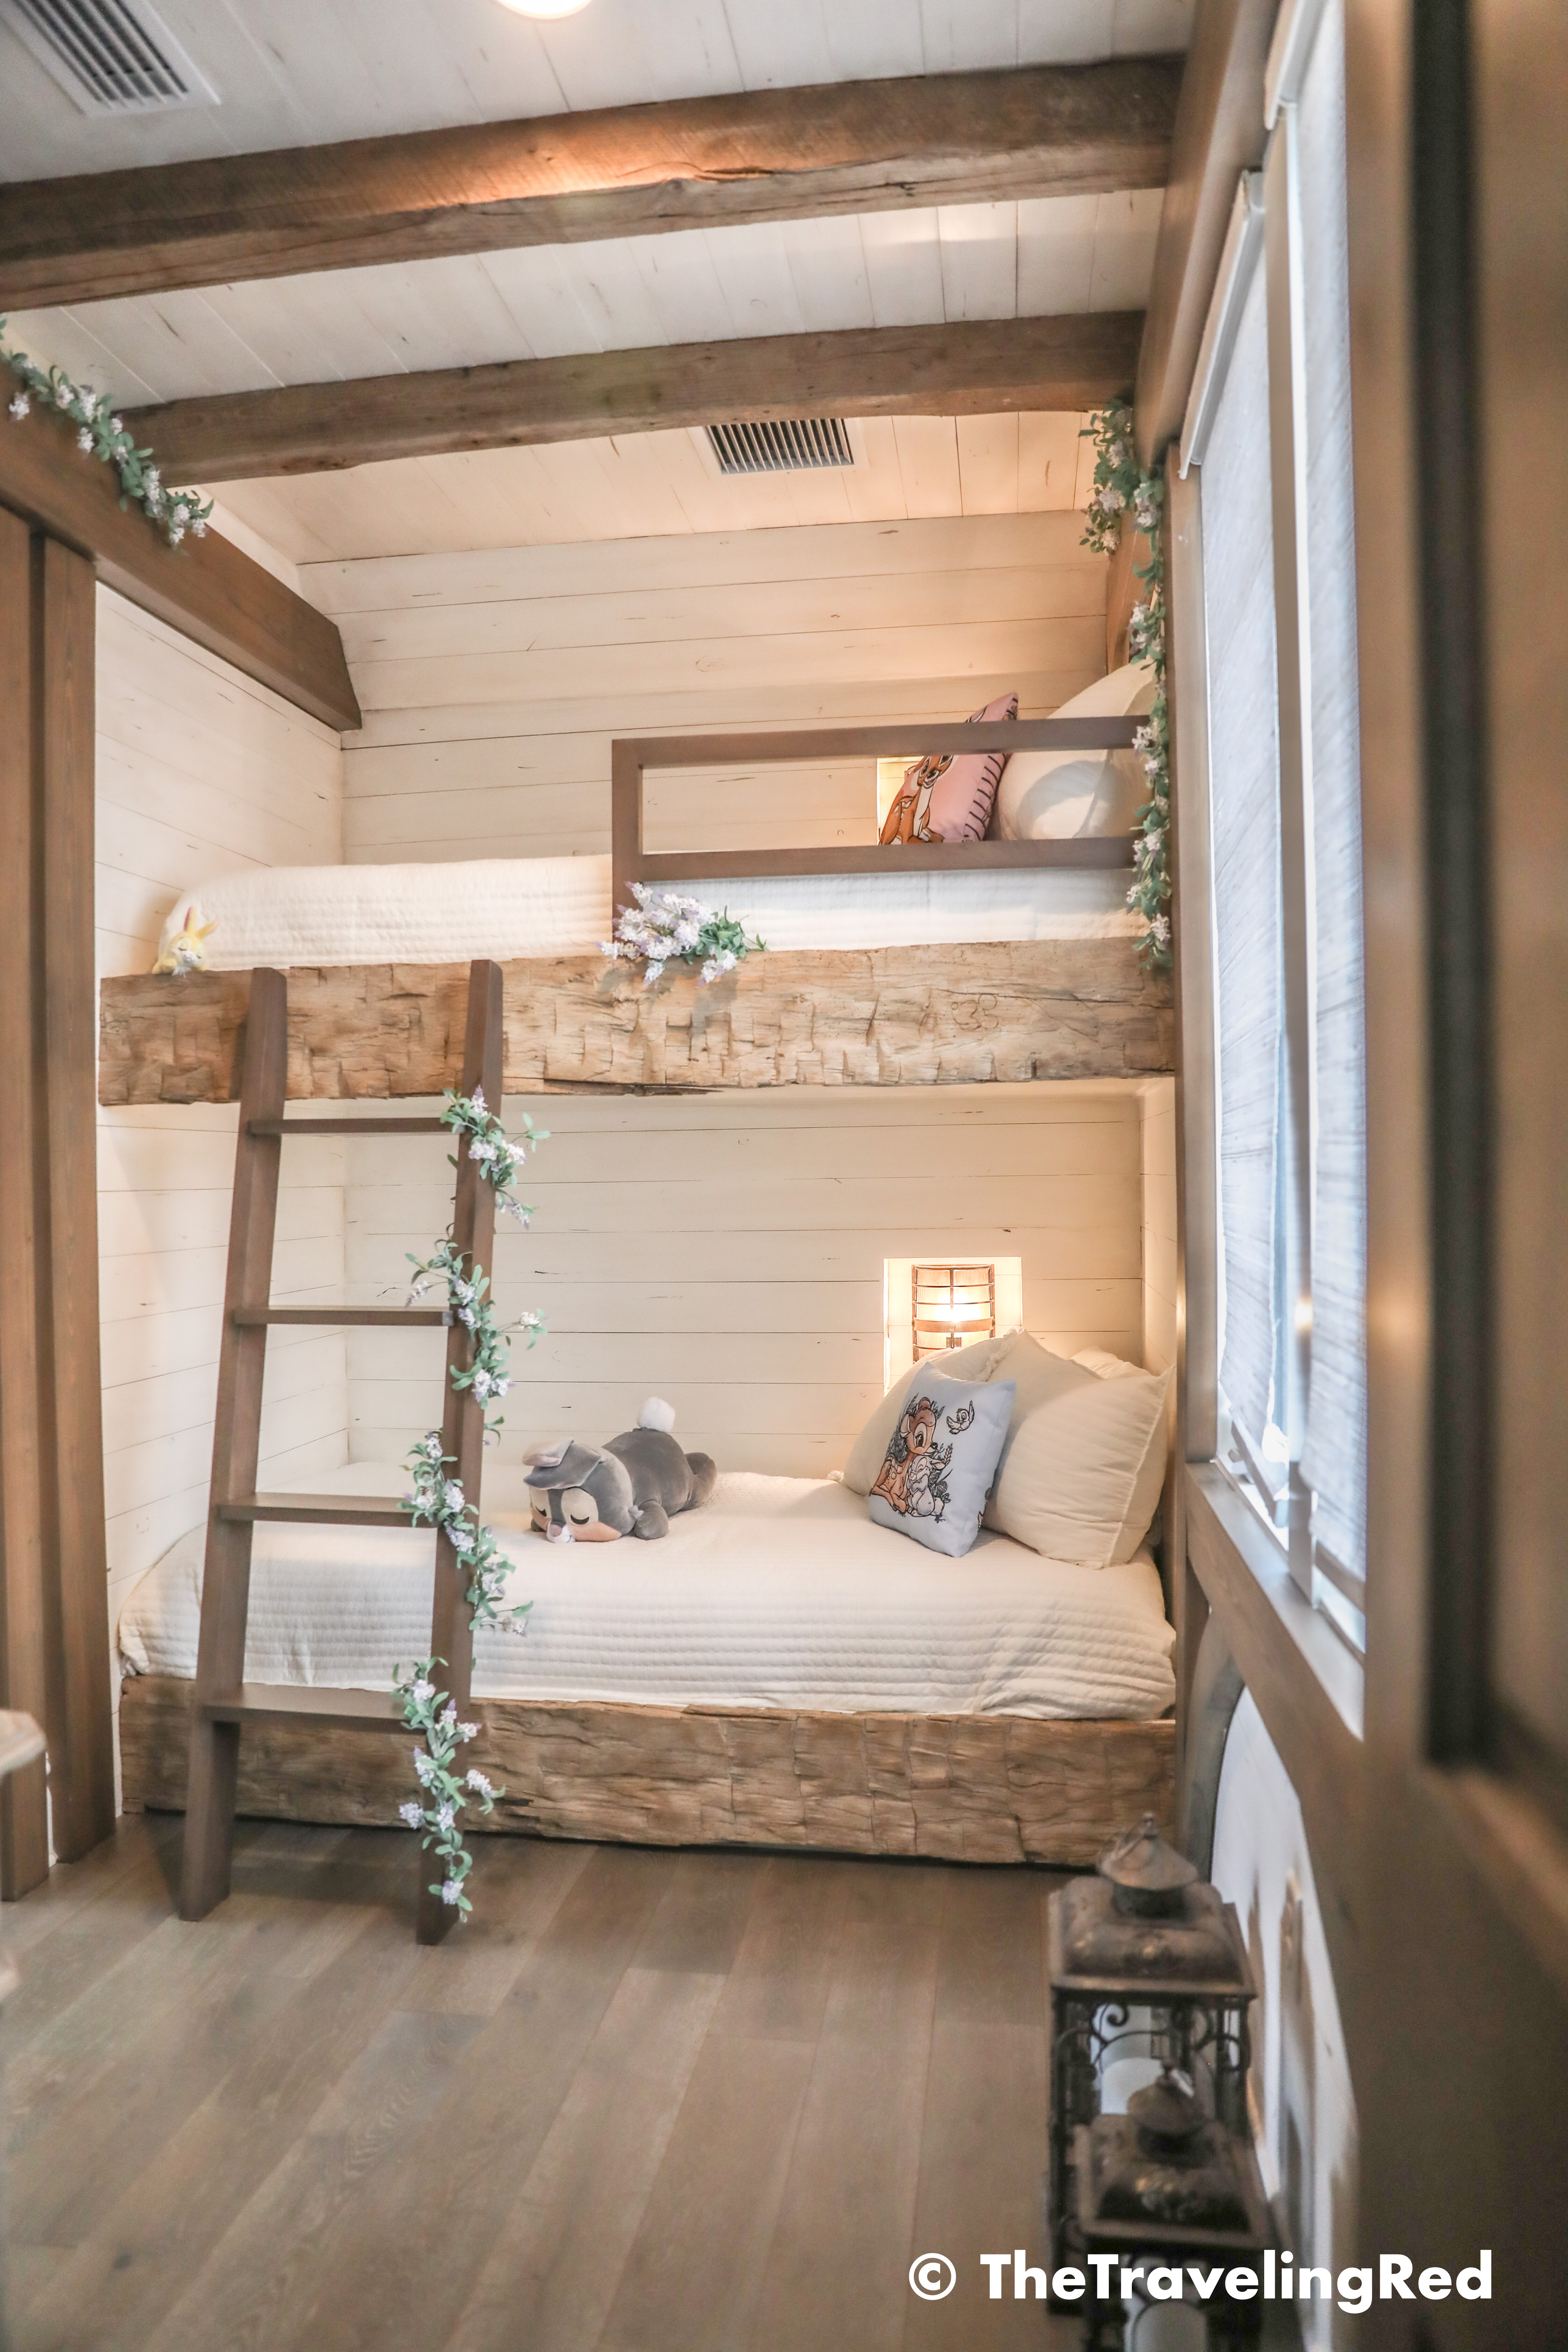 Bambi bunk bed room inside our Disney Golden Oak home. Inspiration for a tiny kids bedroom full of rustic charm and character. Reclaimed wood beams, shiplap, flowers and lanterns fill the room, along with Bambi details.